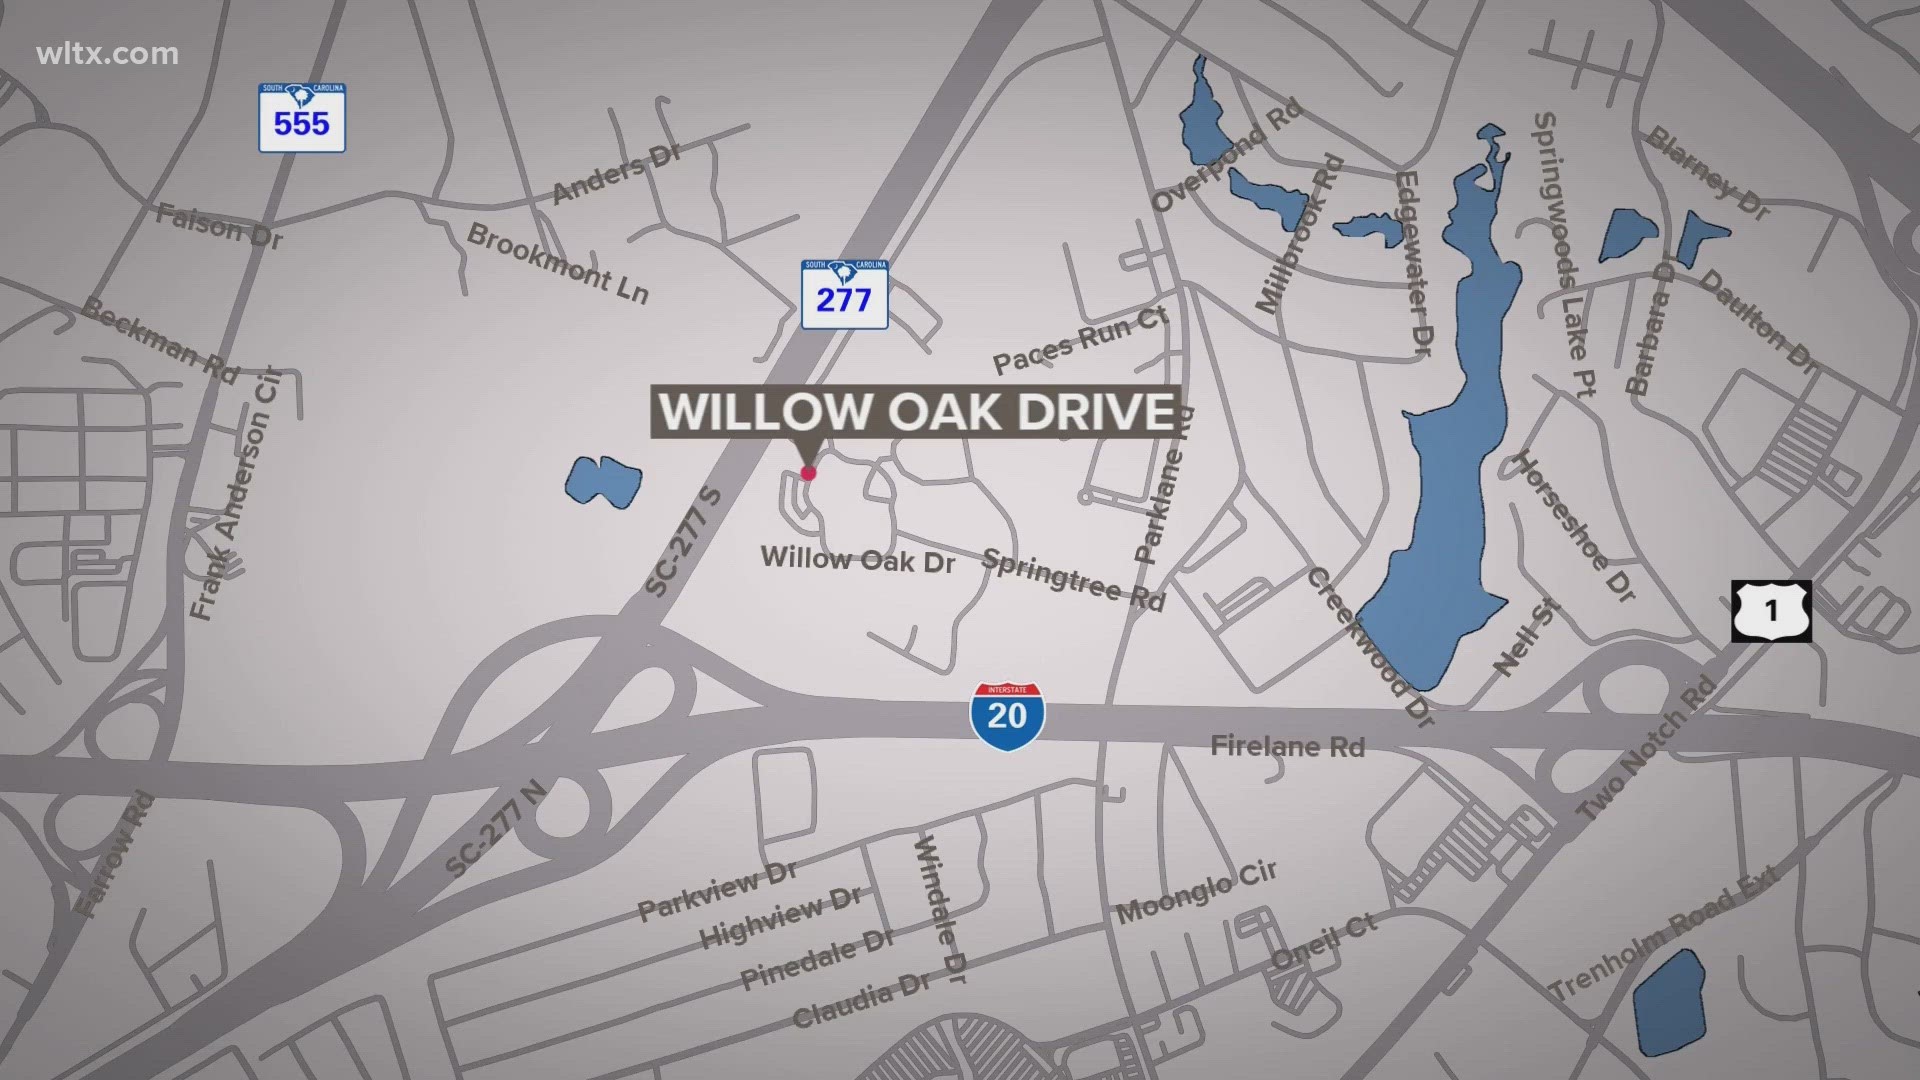 Daeonte Lang, 25 and Christopher Haynes, 21 were killed in the 1000 block of Williow Oak drive.